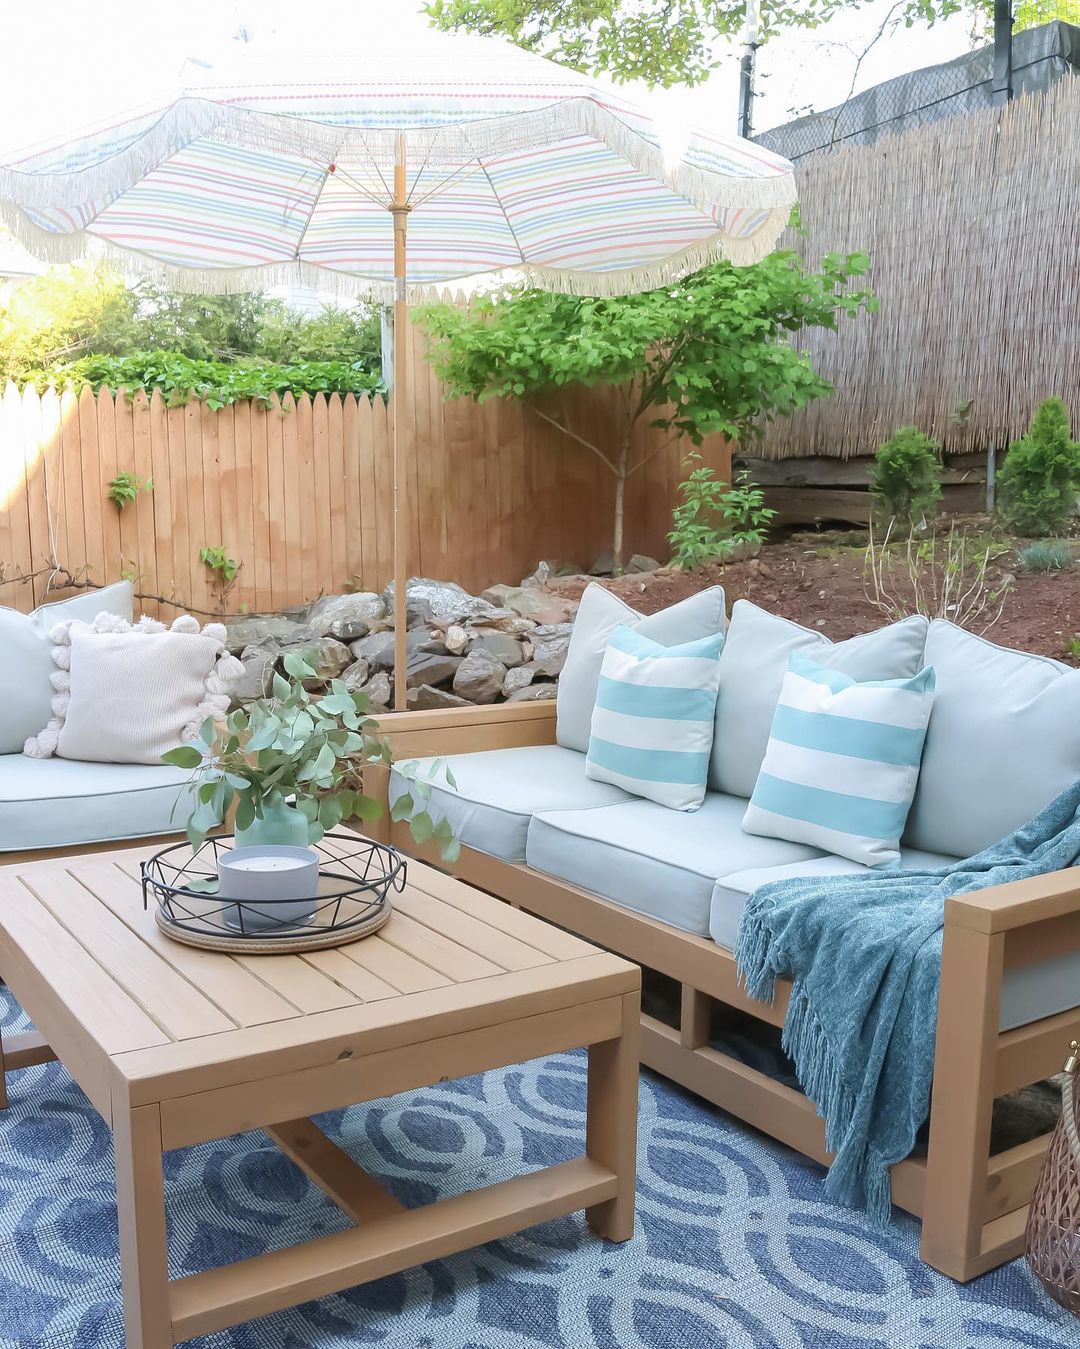 Wooden Outdoor Living Space Furniture. Photo by Instagram user @theprettylittlehome